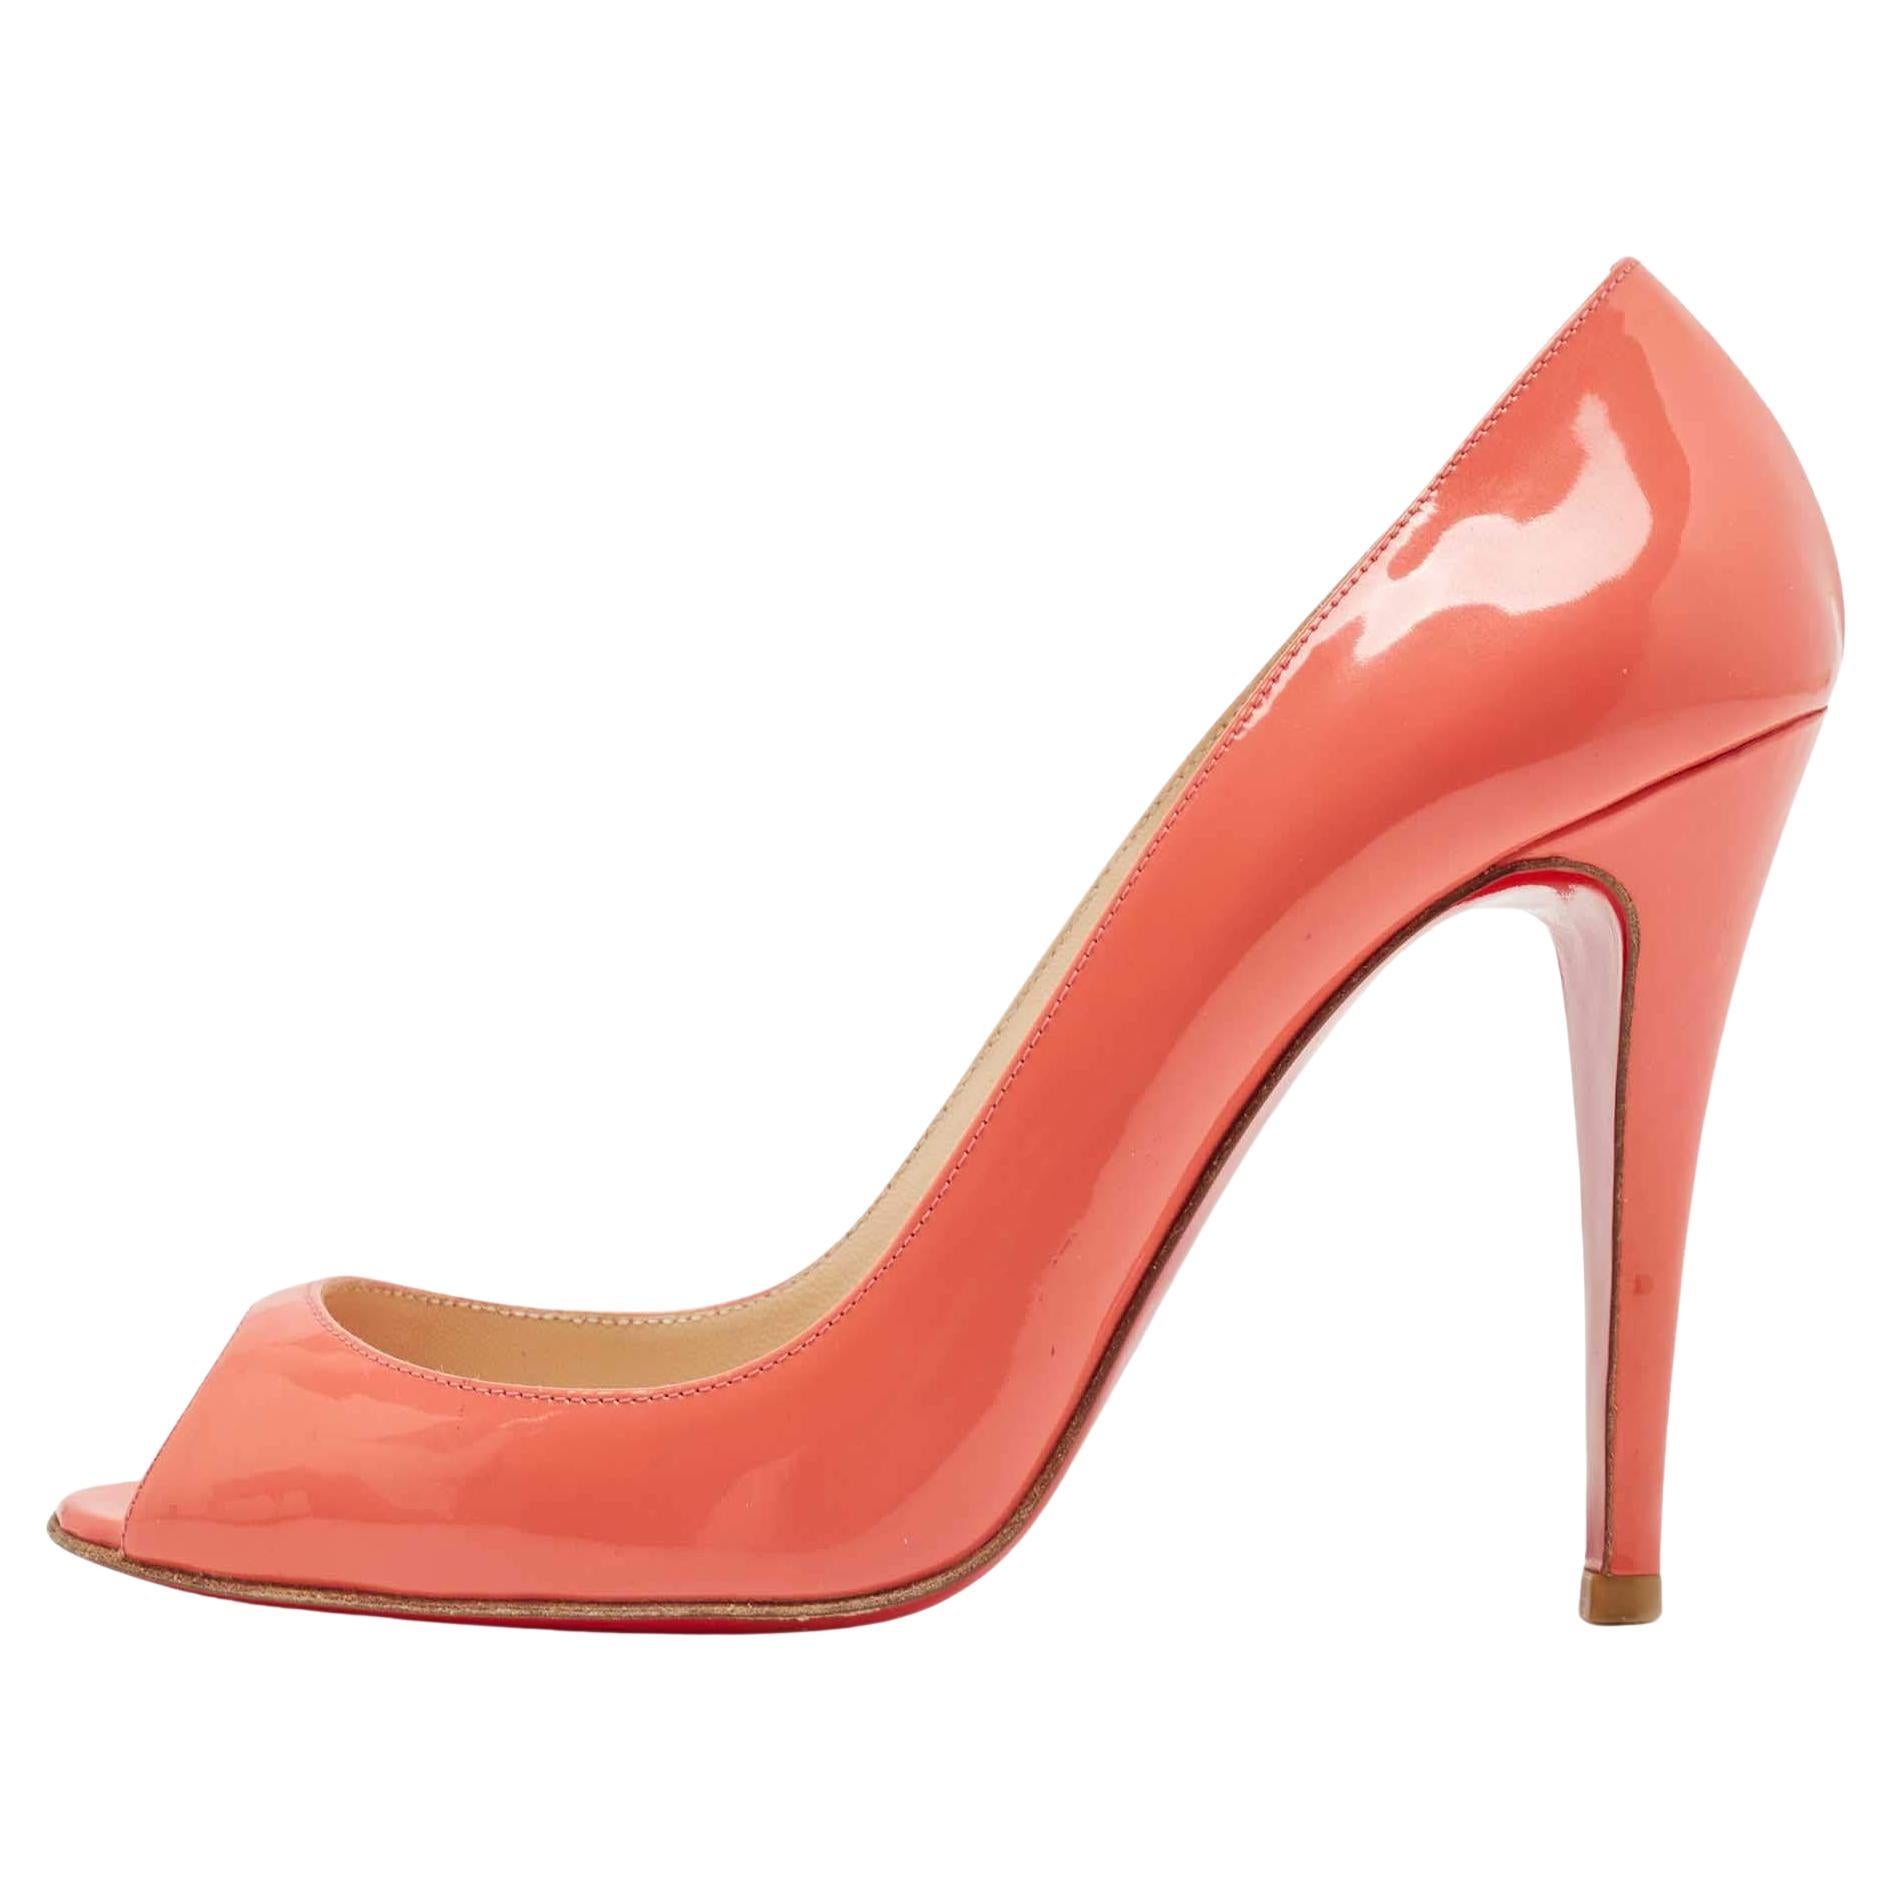 Christian Louboutin Pink Patent Leather Flo Pumps Size 37